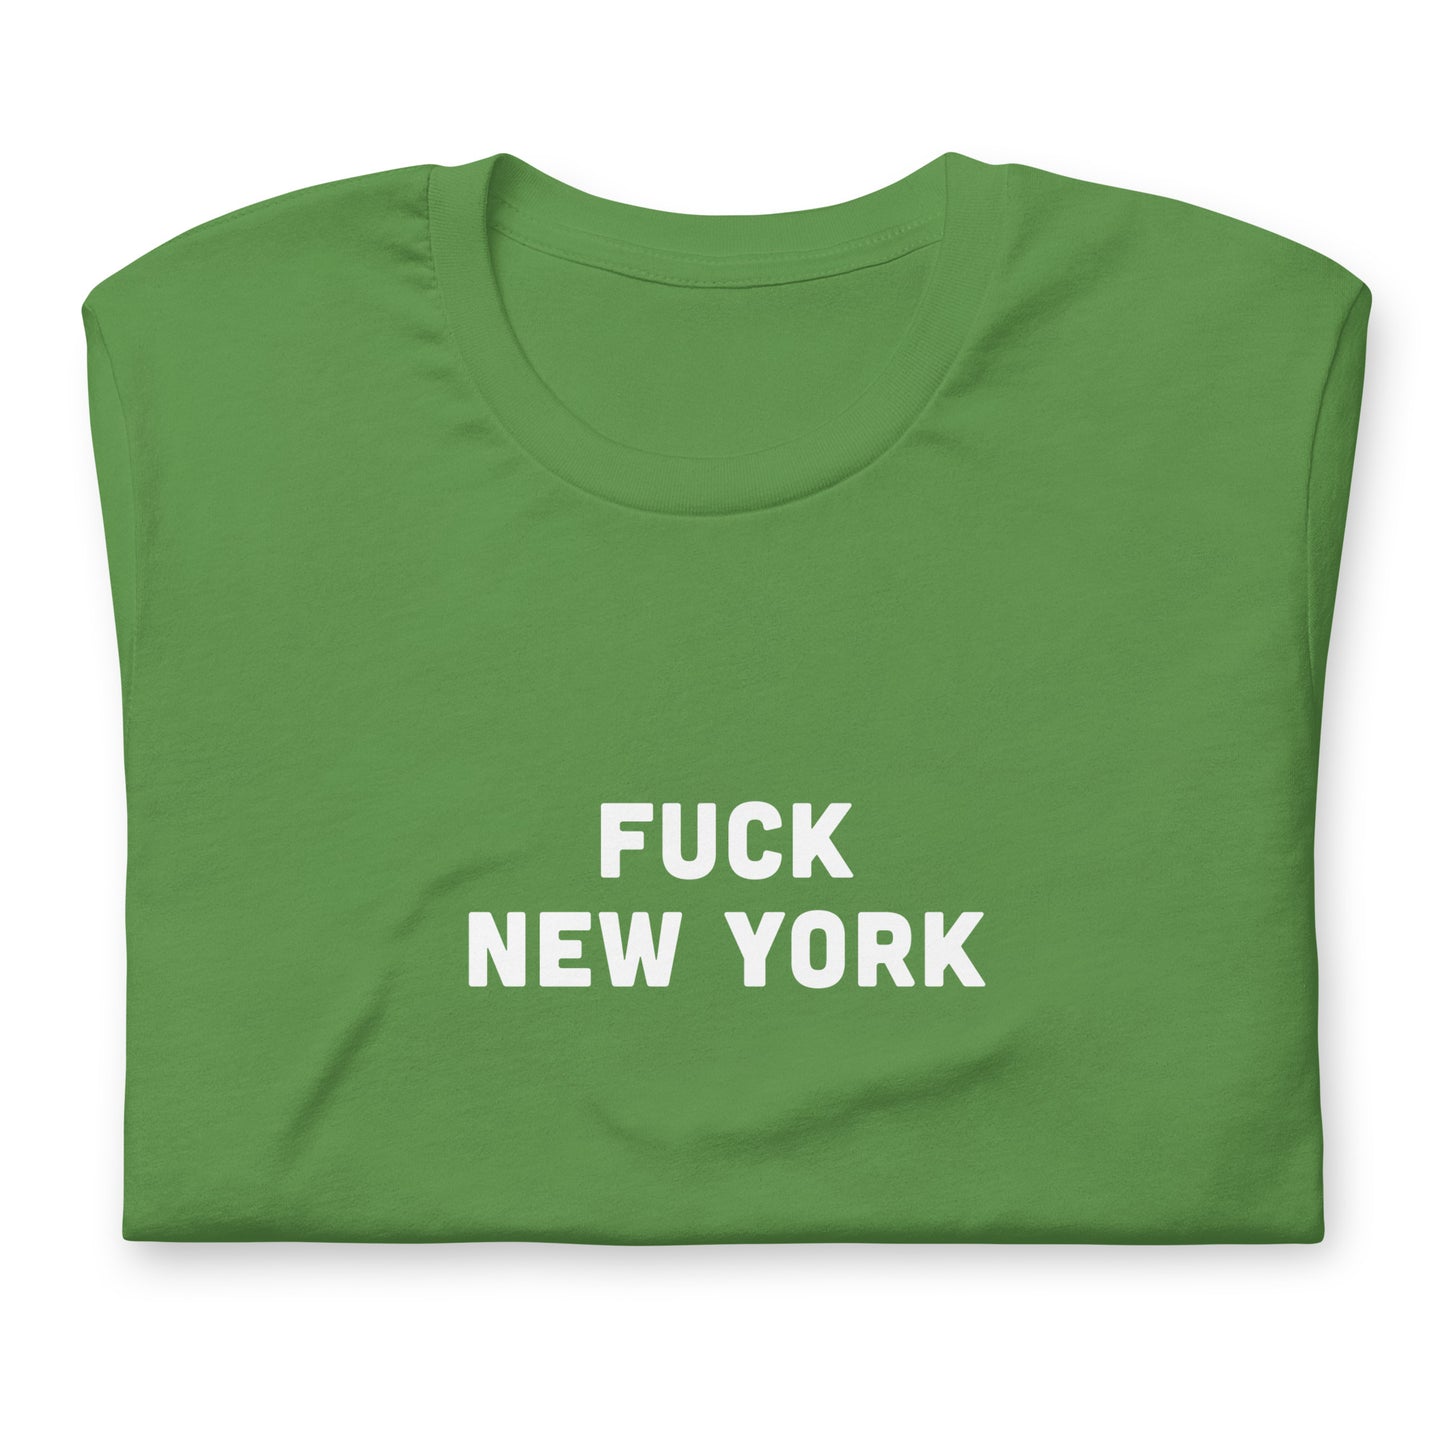 Fuck New York T-Shirt Size 2XL Color Navy